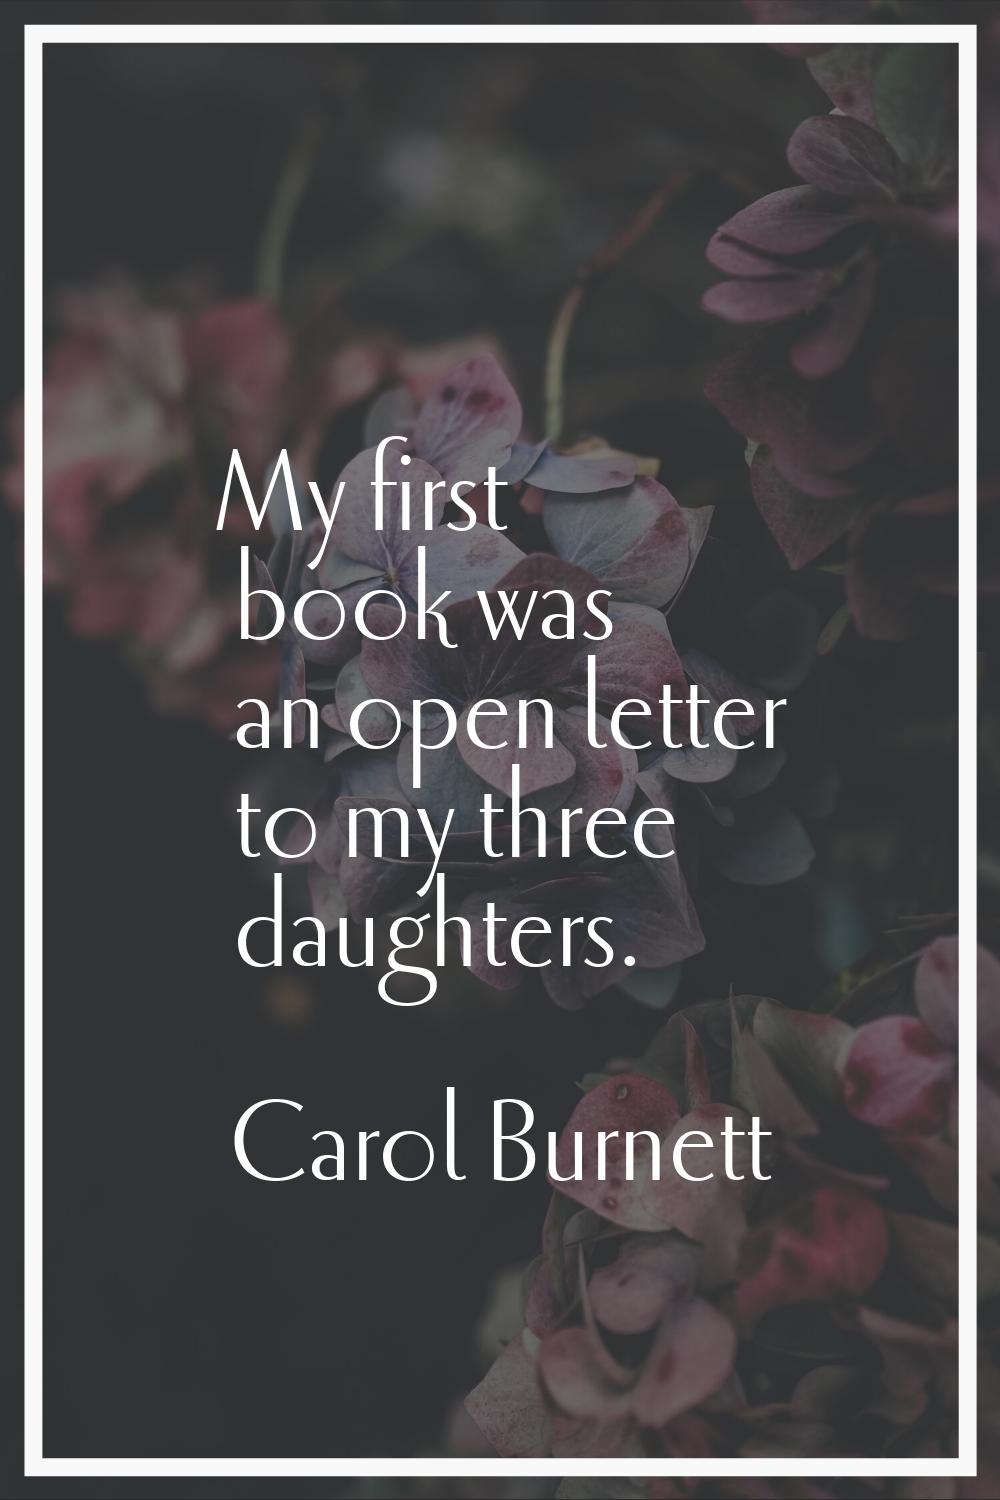 My first book was an open letter to my three daughters.